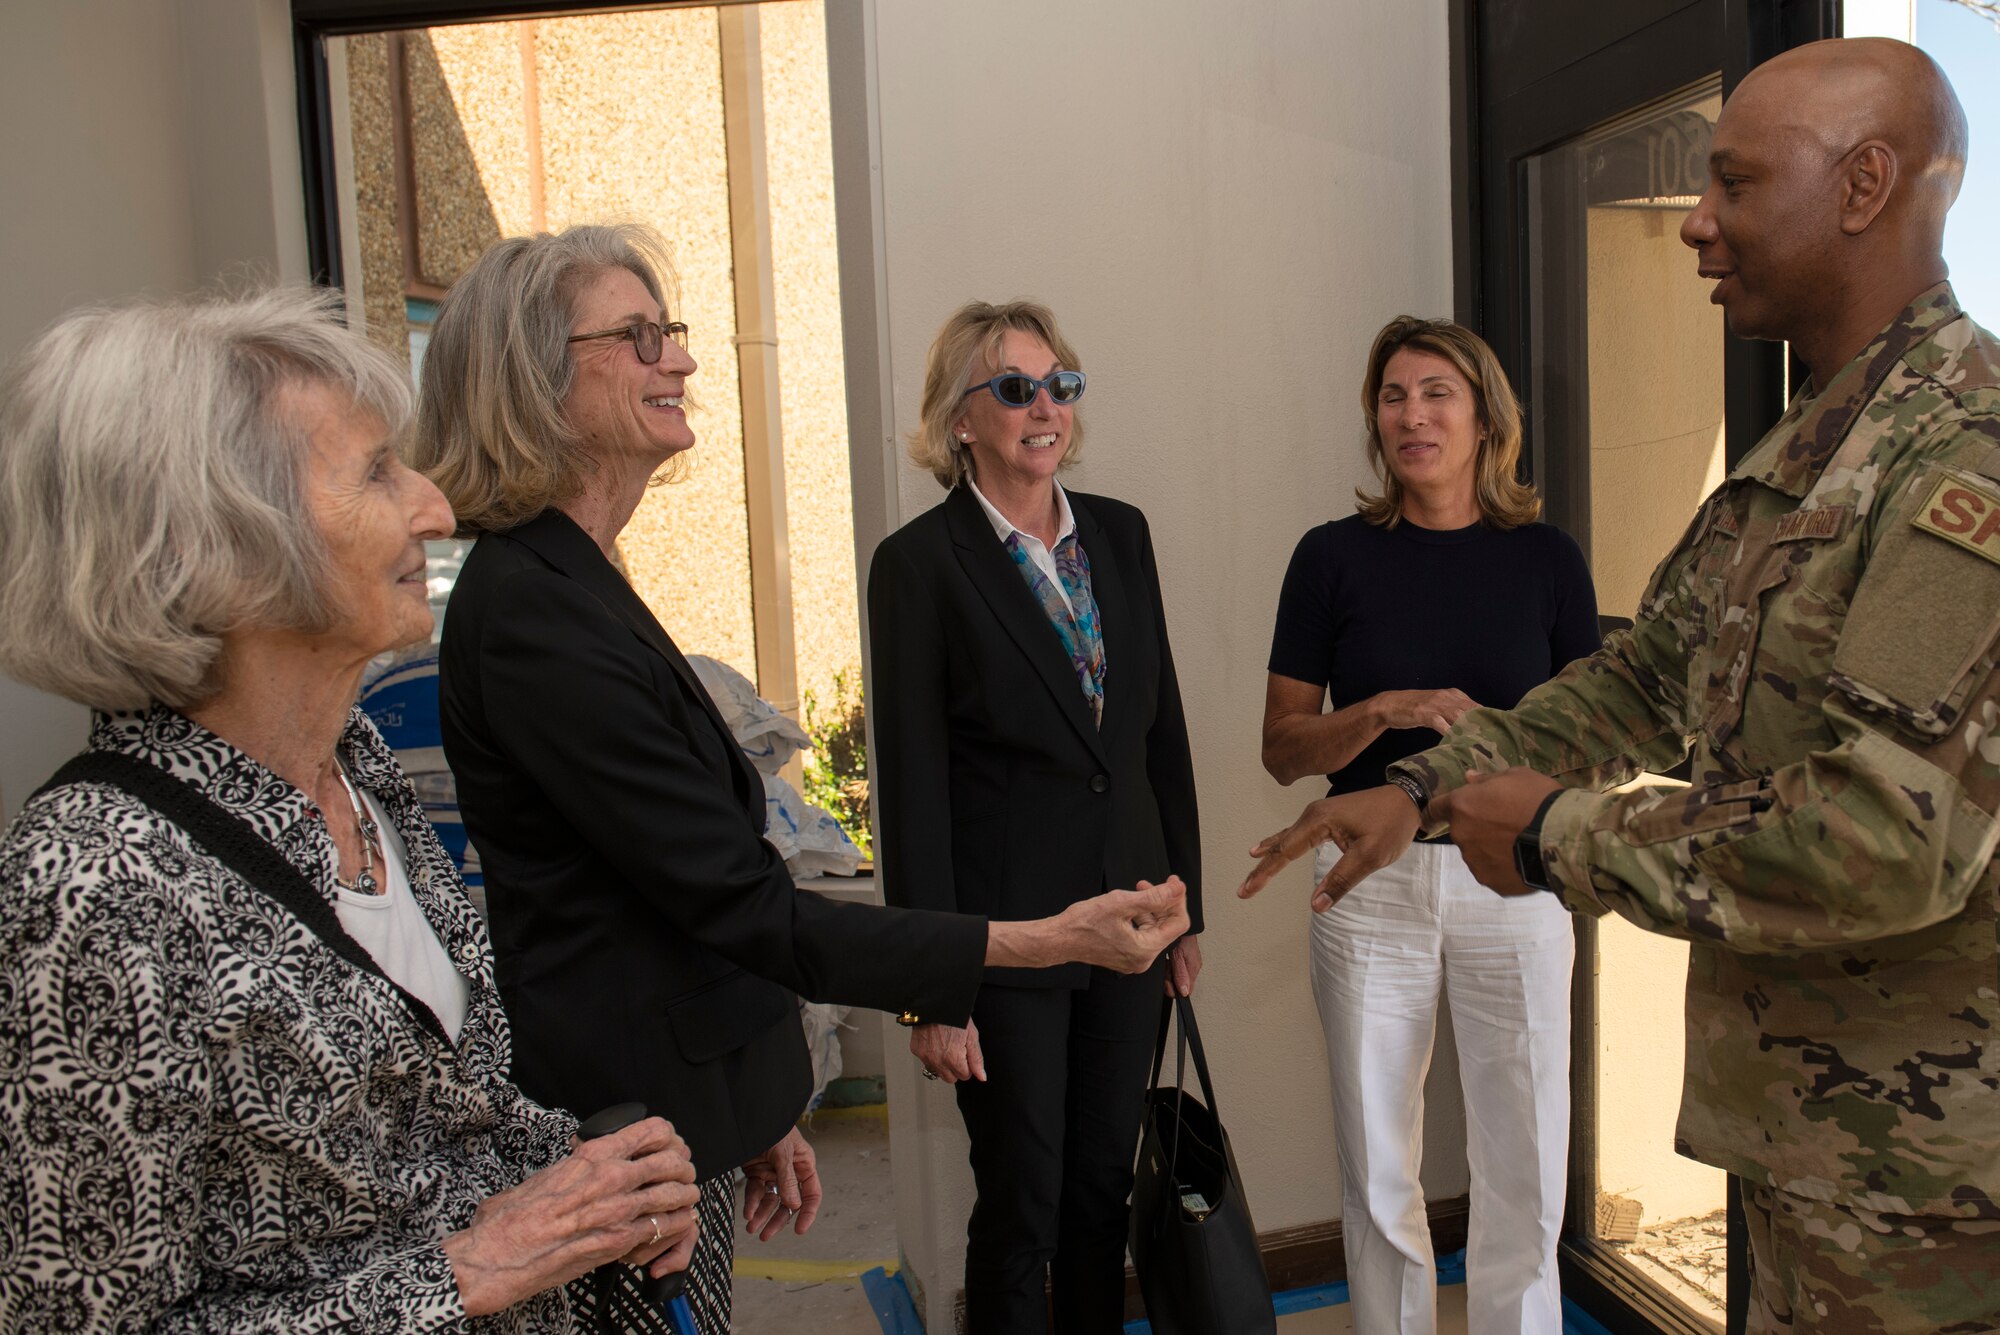 Chief Master Sgt. Craig Williams, 325th Fighter Wing command chief, thanks the daughter and granddaughters of World War I pilot Lt. Frank B. Tyndall, 2nd Bombardment Group after their visit at Tyndall Air Force Base, Fla., Feb. 25, 2019. Mary Tyndall Troff and her daughters were invited to visit TAFB after she sent a letter about her concerns for the base and the well-being of Airmen after Hurricane Michael. (U.S. Air Force photo by Staff Sgt. Alexandre Montes)